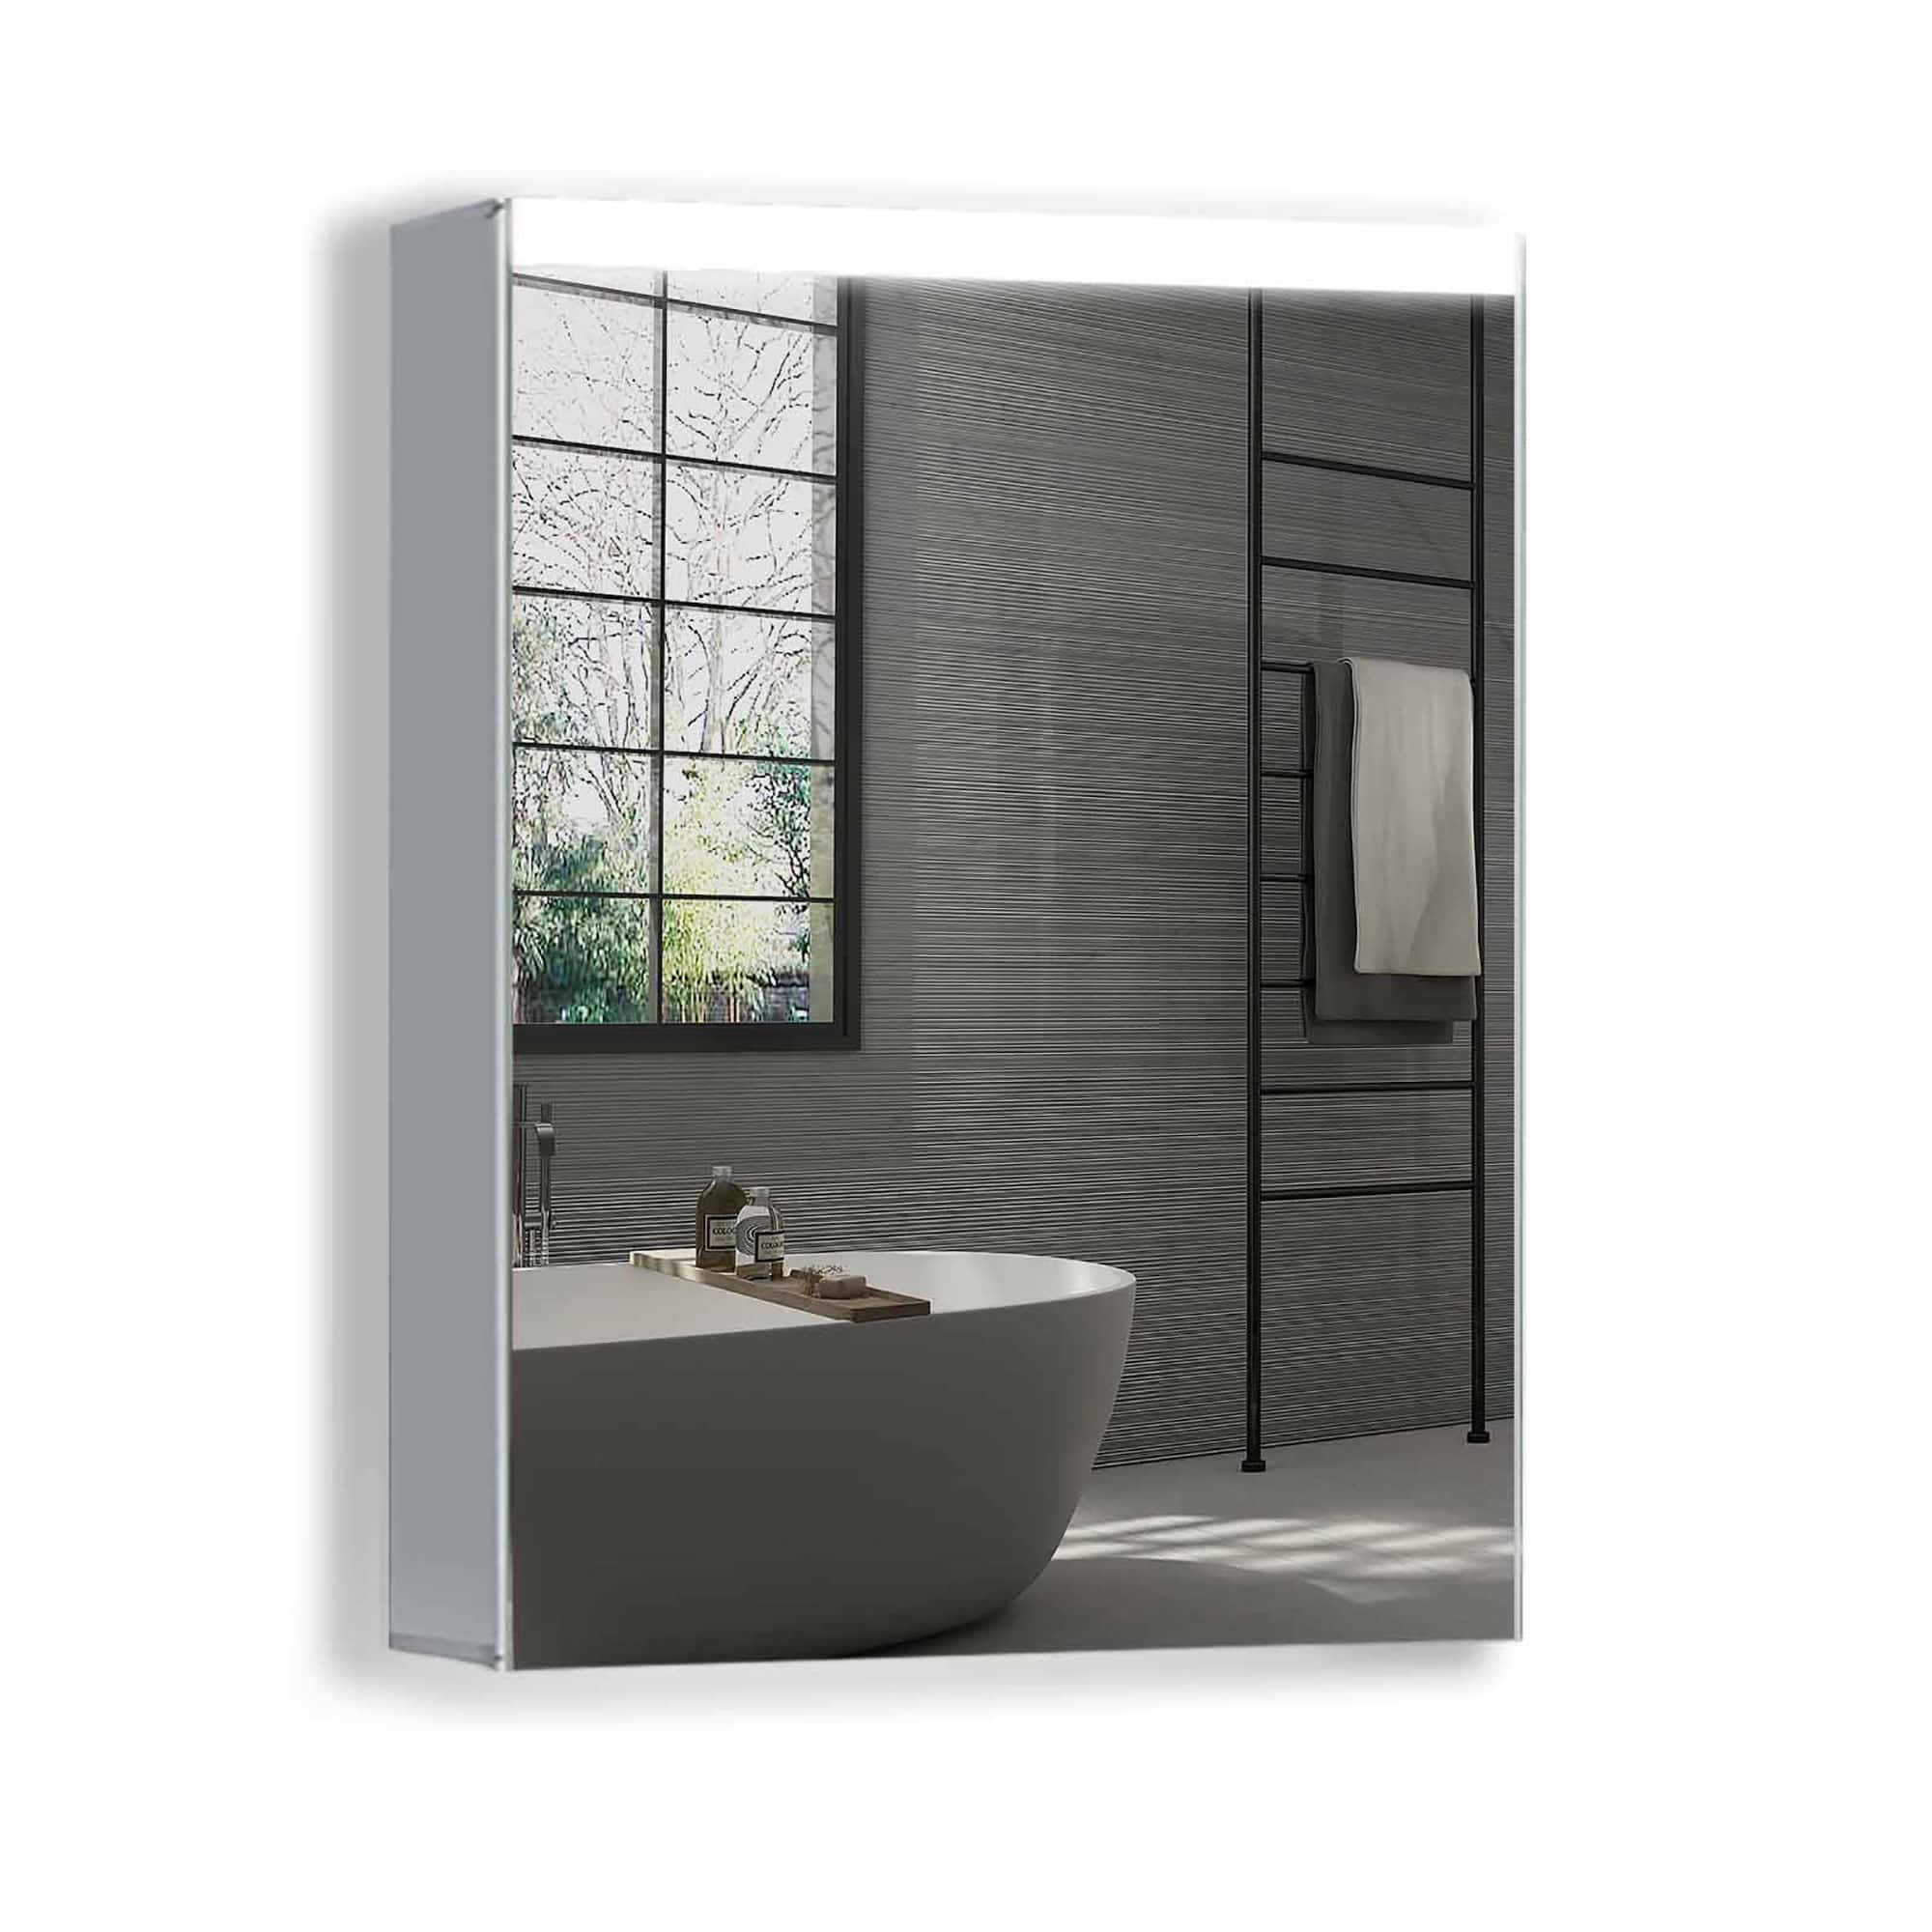 Medium Rectangle LED Lighted Bathroom Wall Mounted Mirror Medicine Cabinet (30 in. H x 24 in. W) -Boyel Living